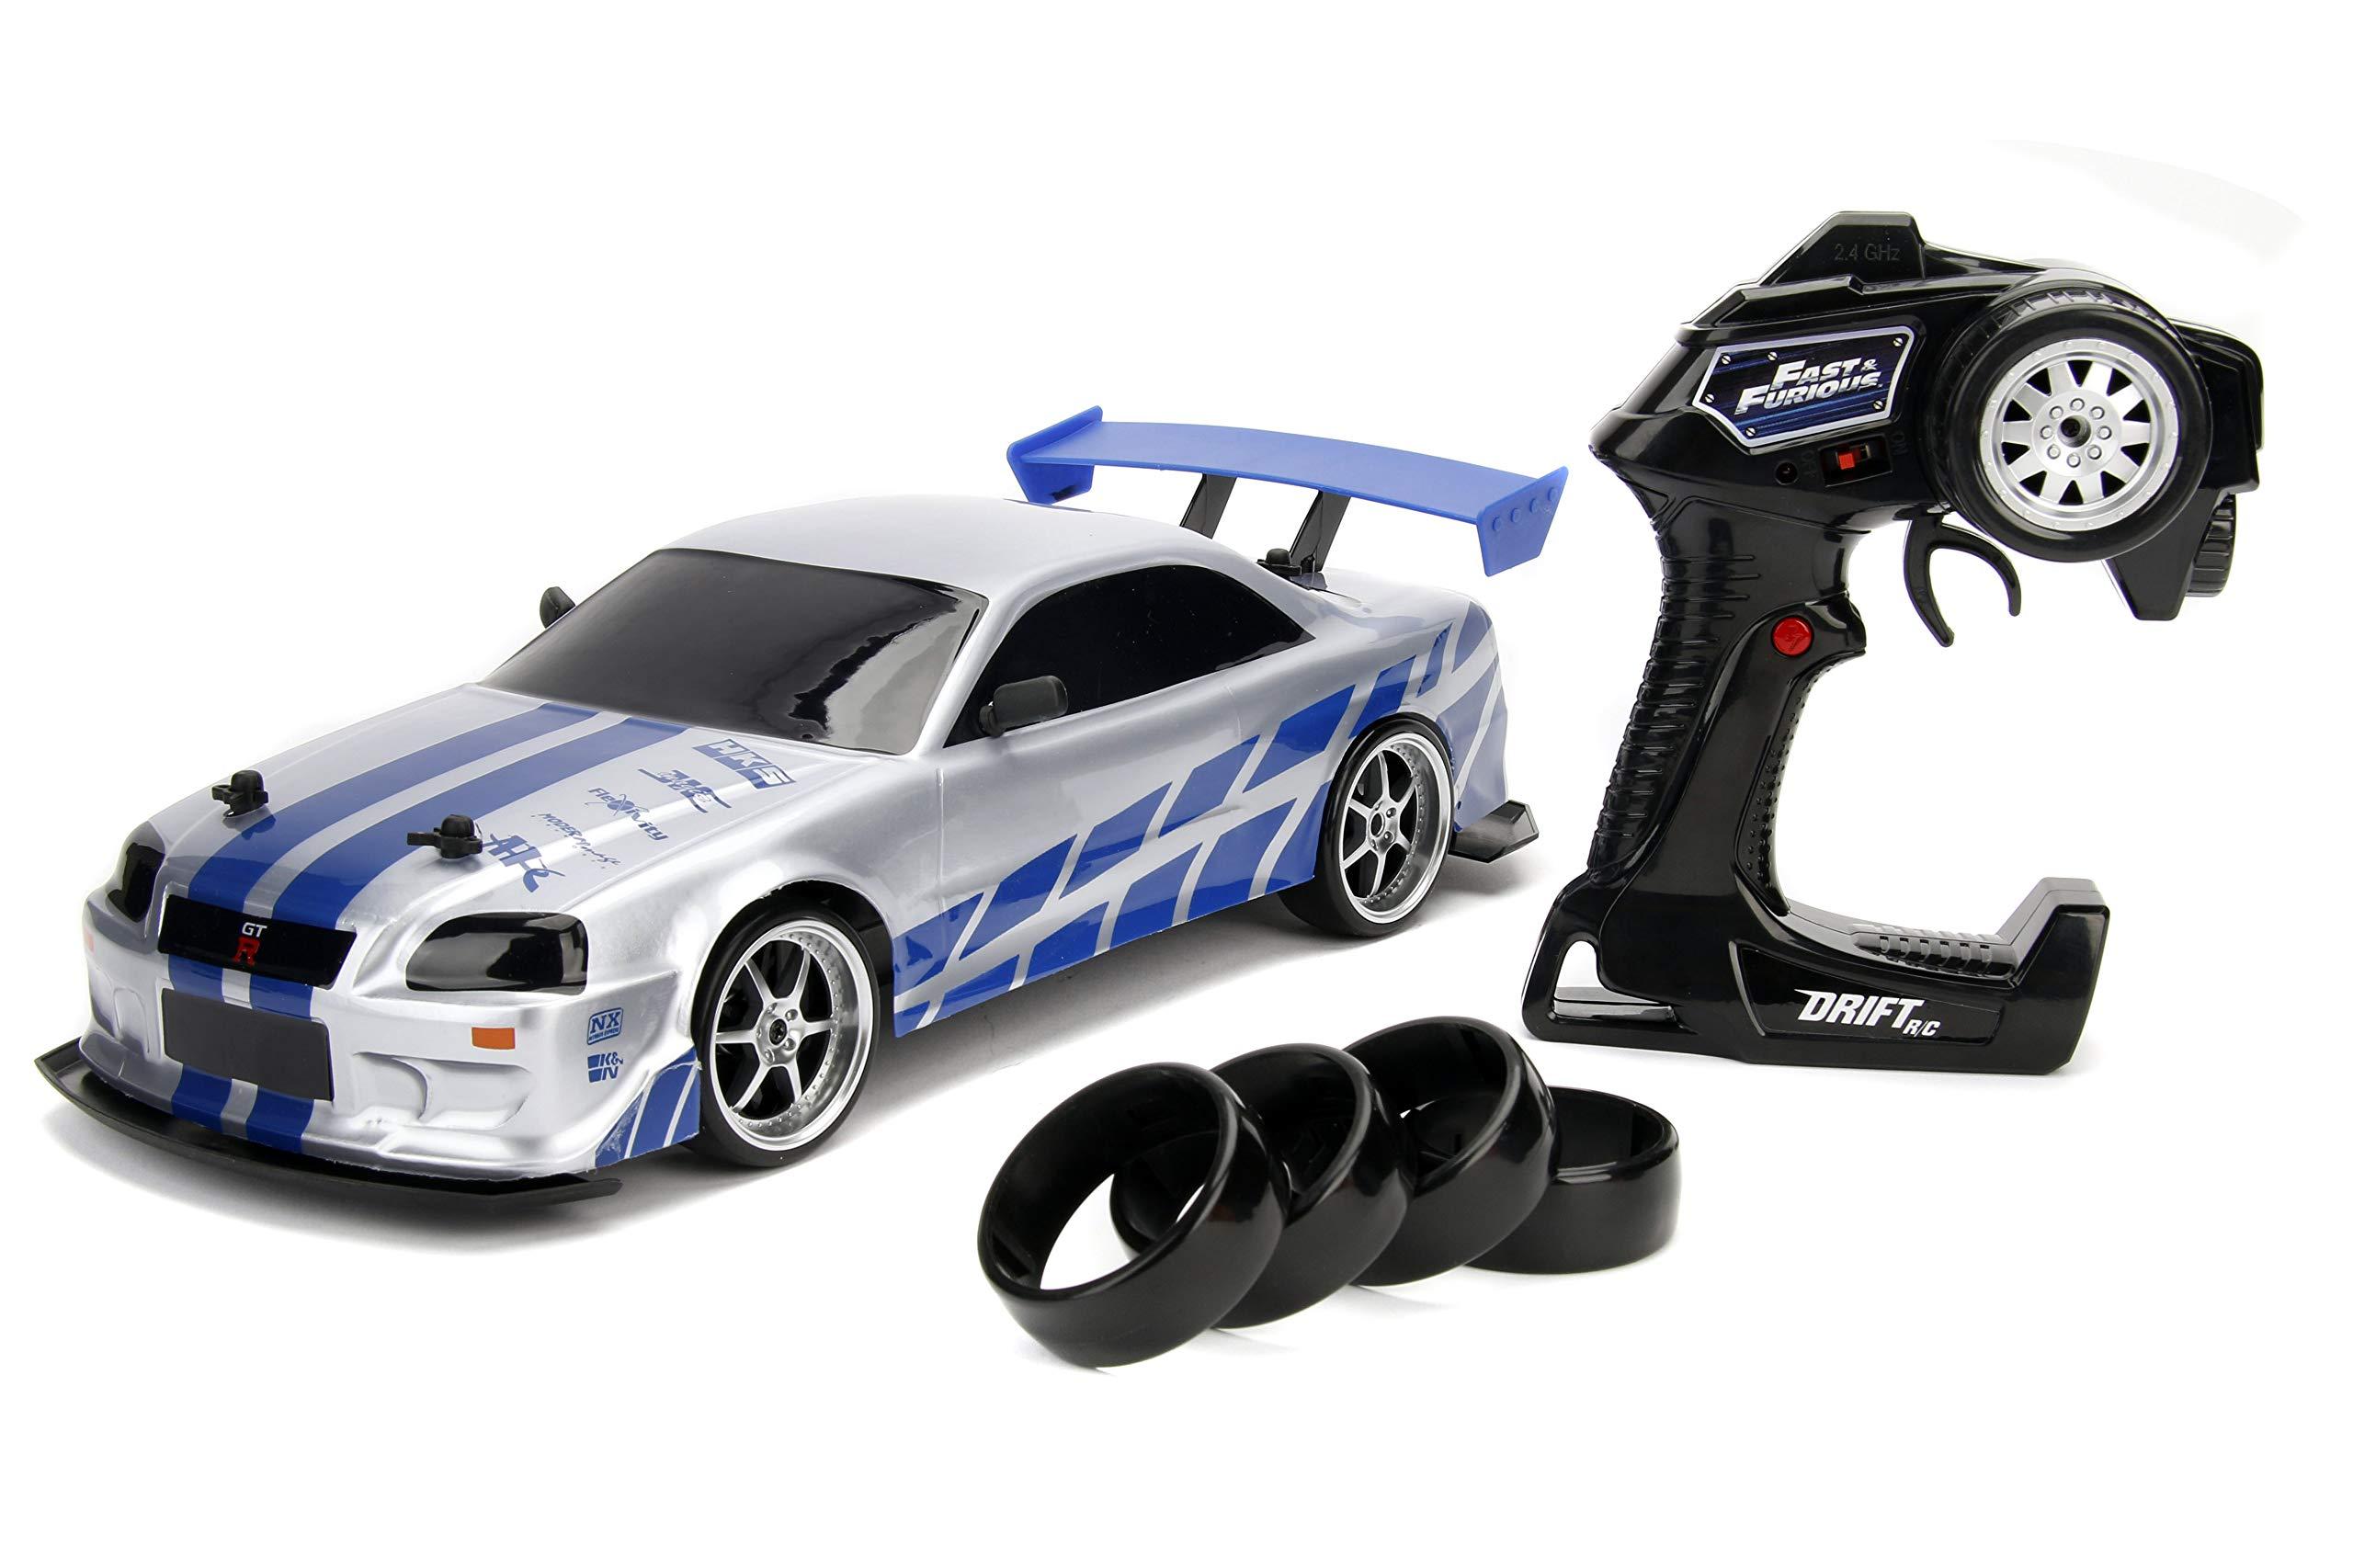 Best Rc Car Under $50: Top Pick for Under $50: Liberty Imports RC Car for Drifting and Stunts